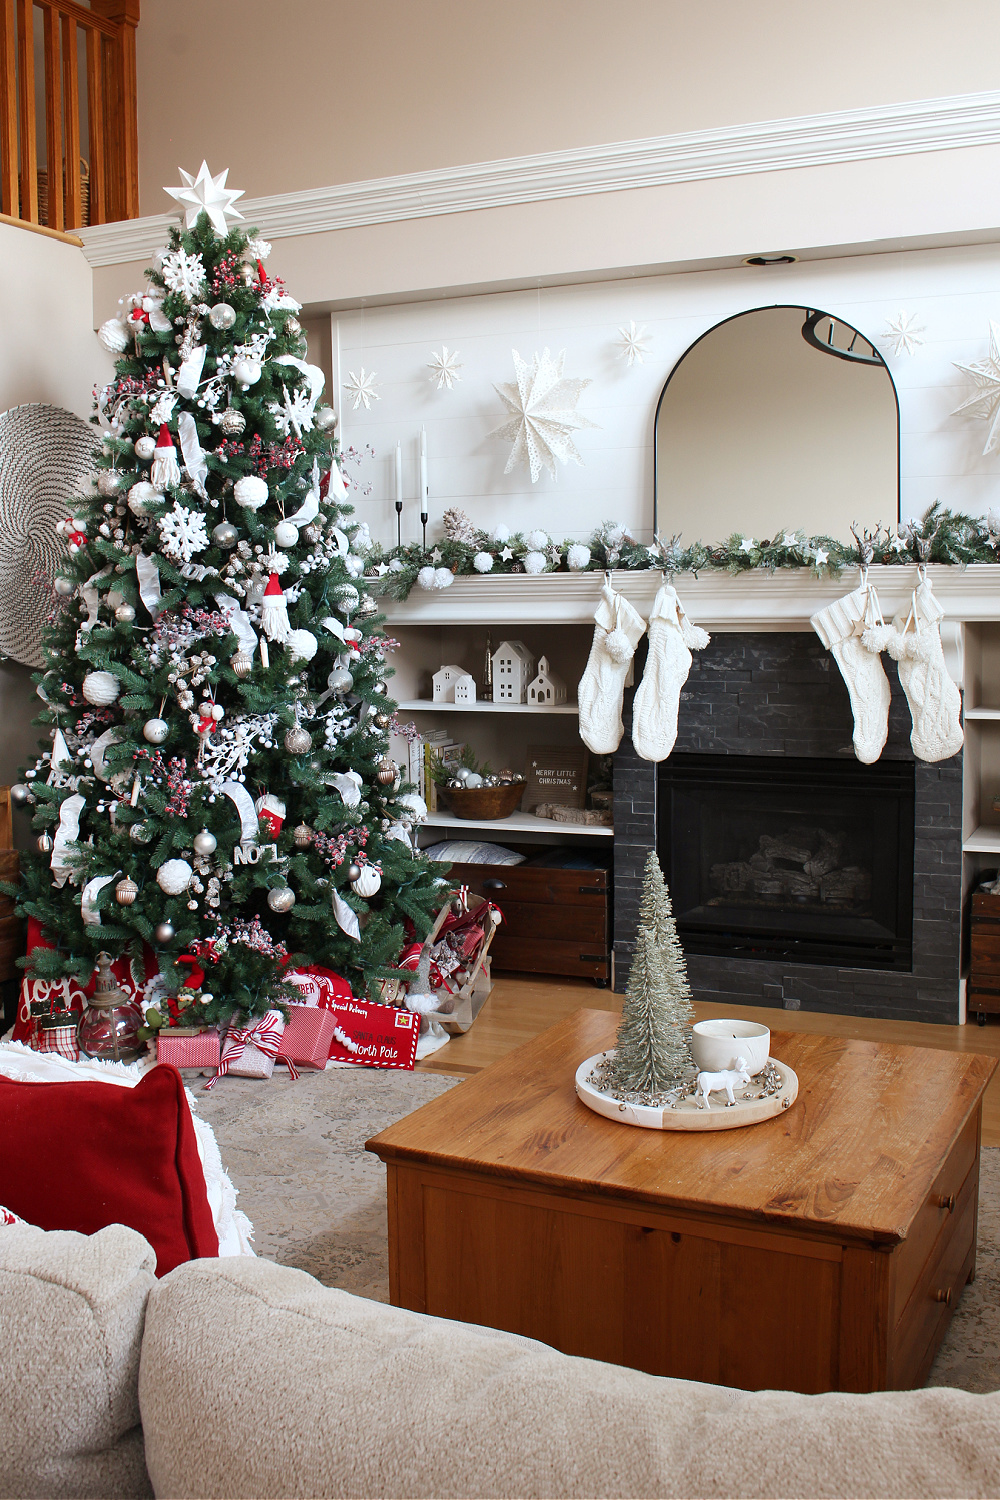 Red and white living room Christmas decor.